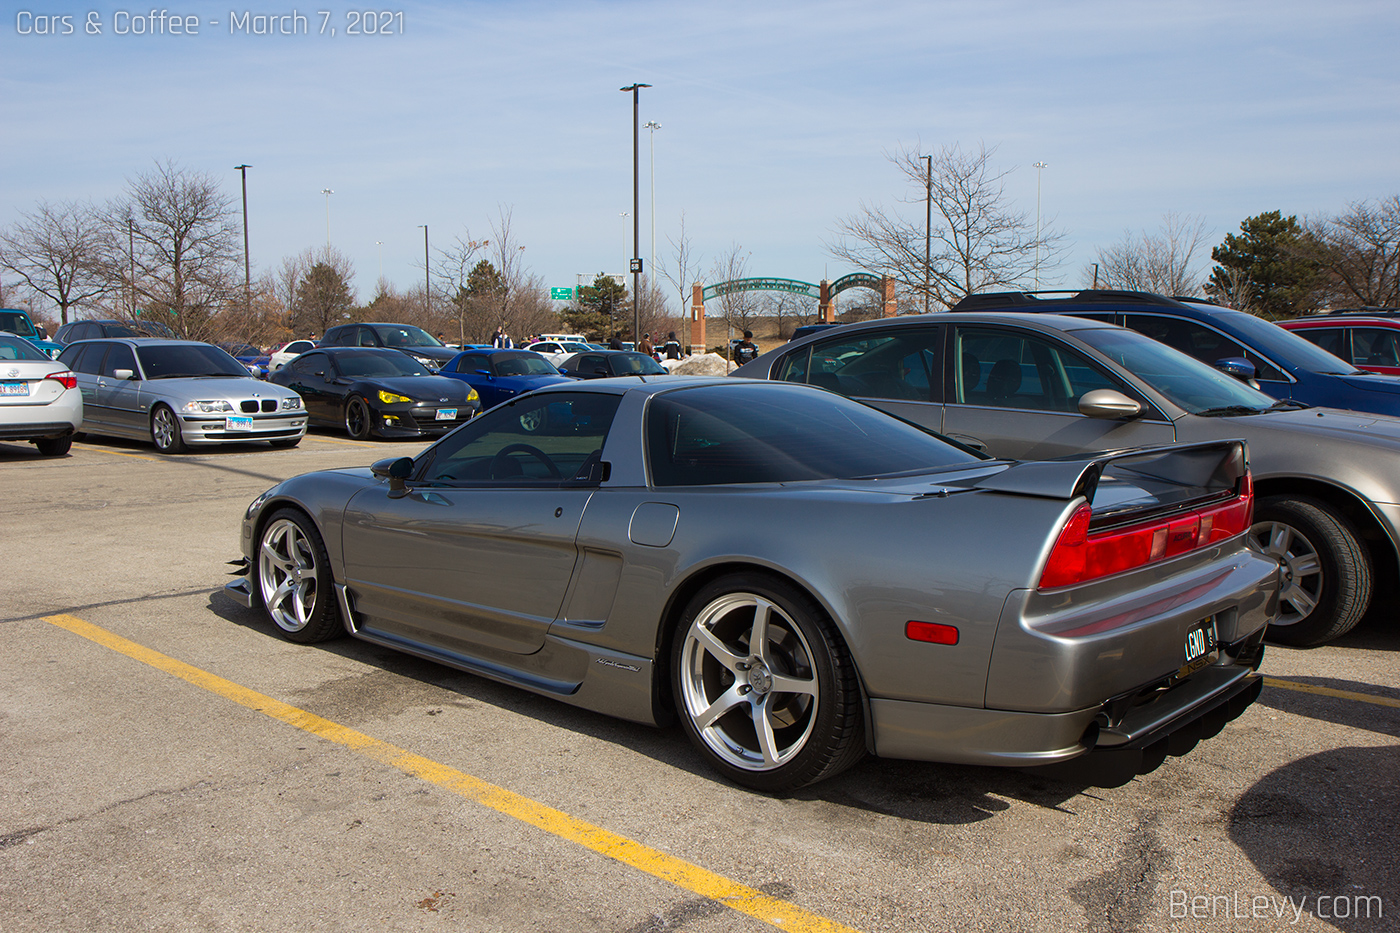 Silver Acura NSX at Streets of Woodfield